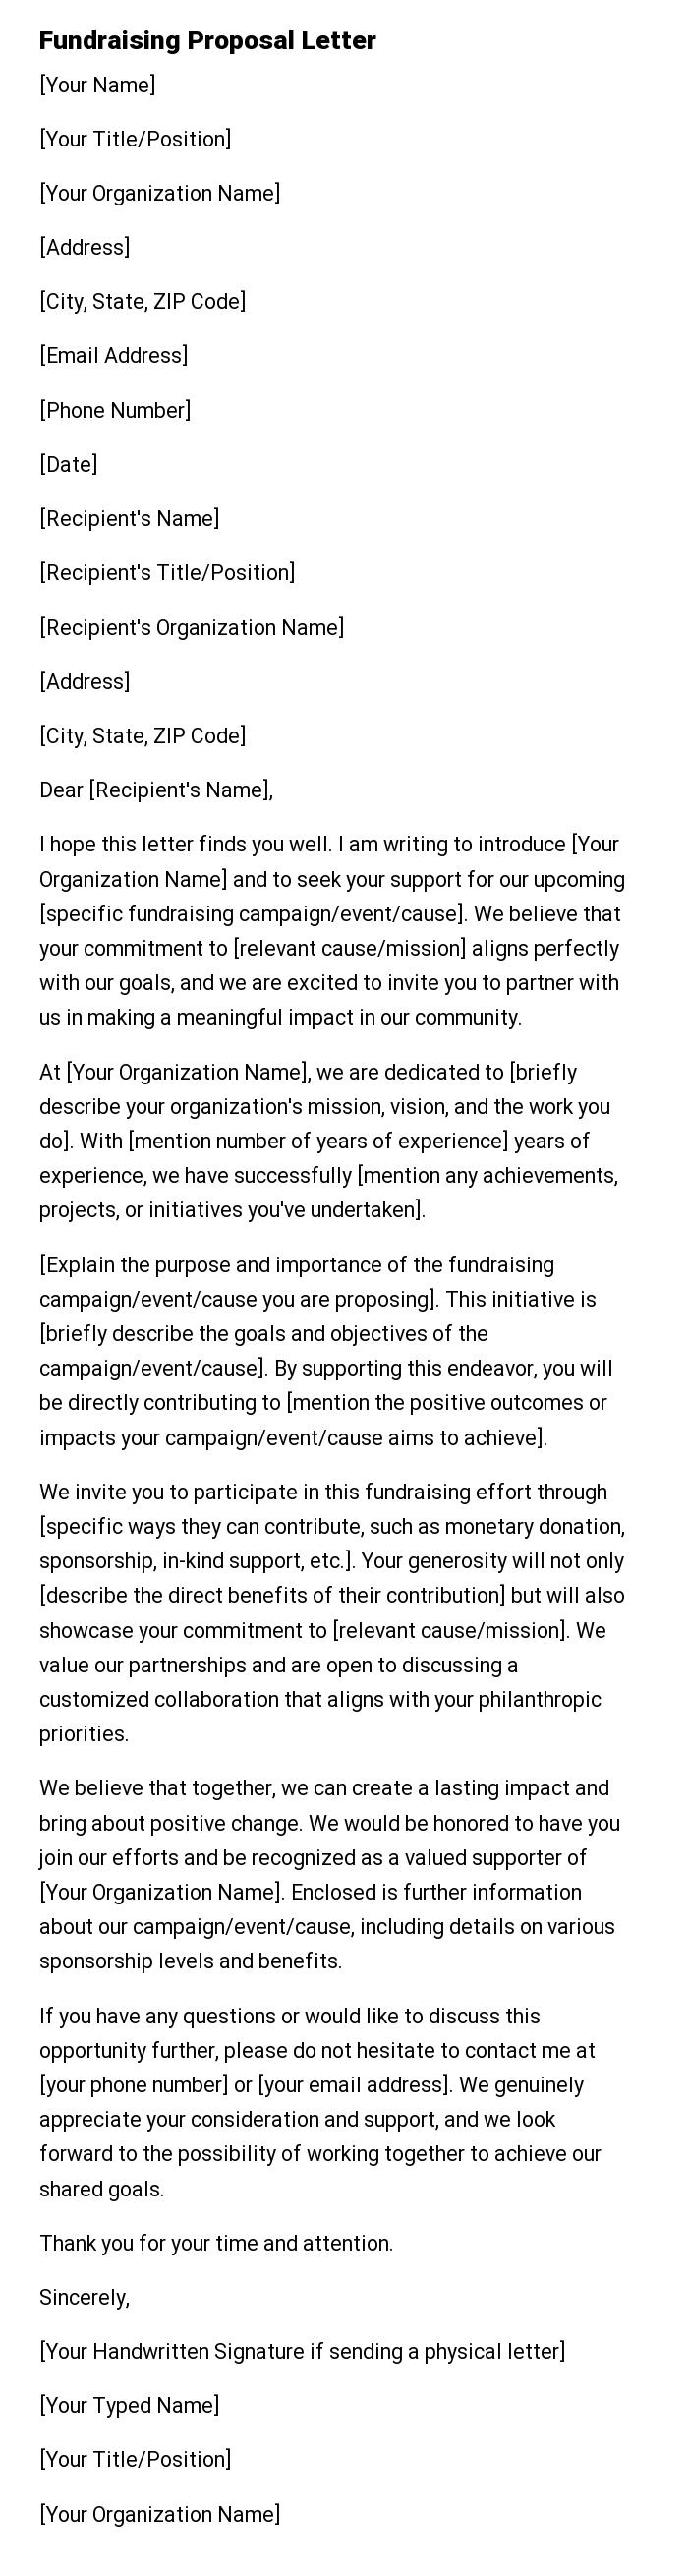 Fundraising Proposal Letter